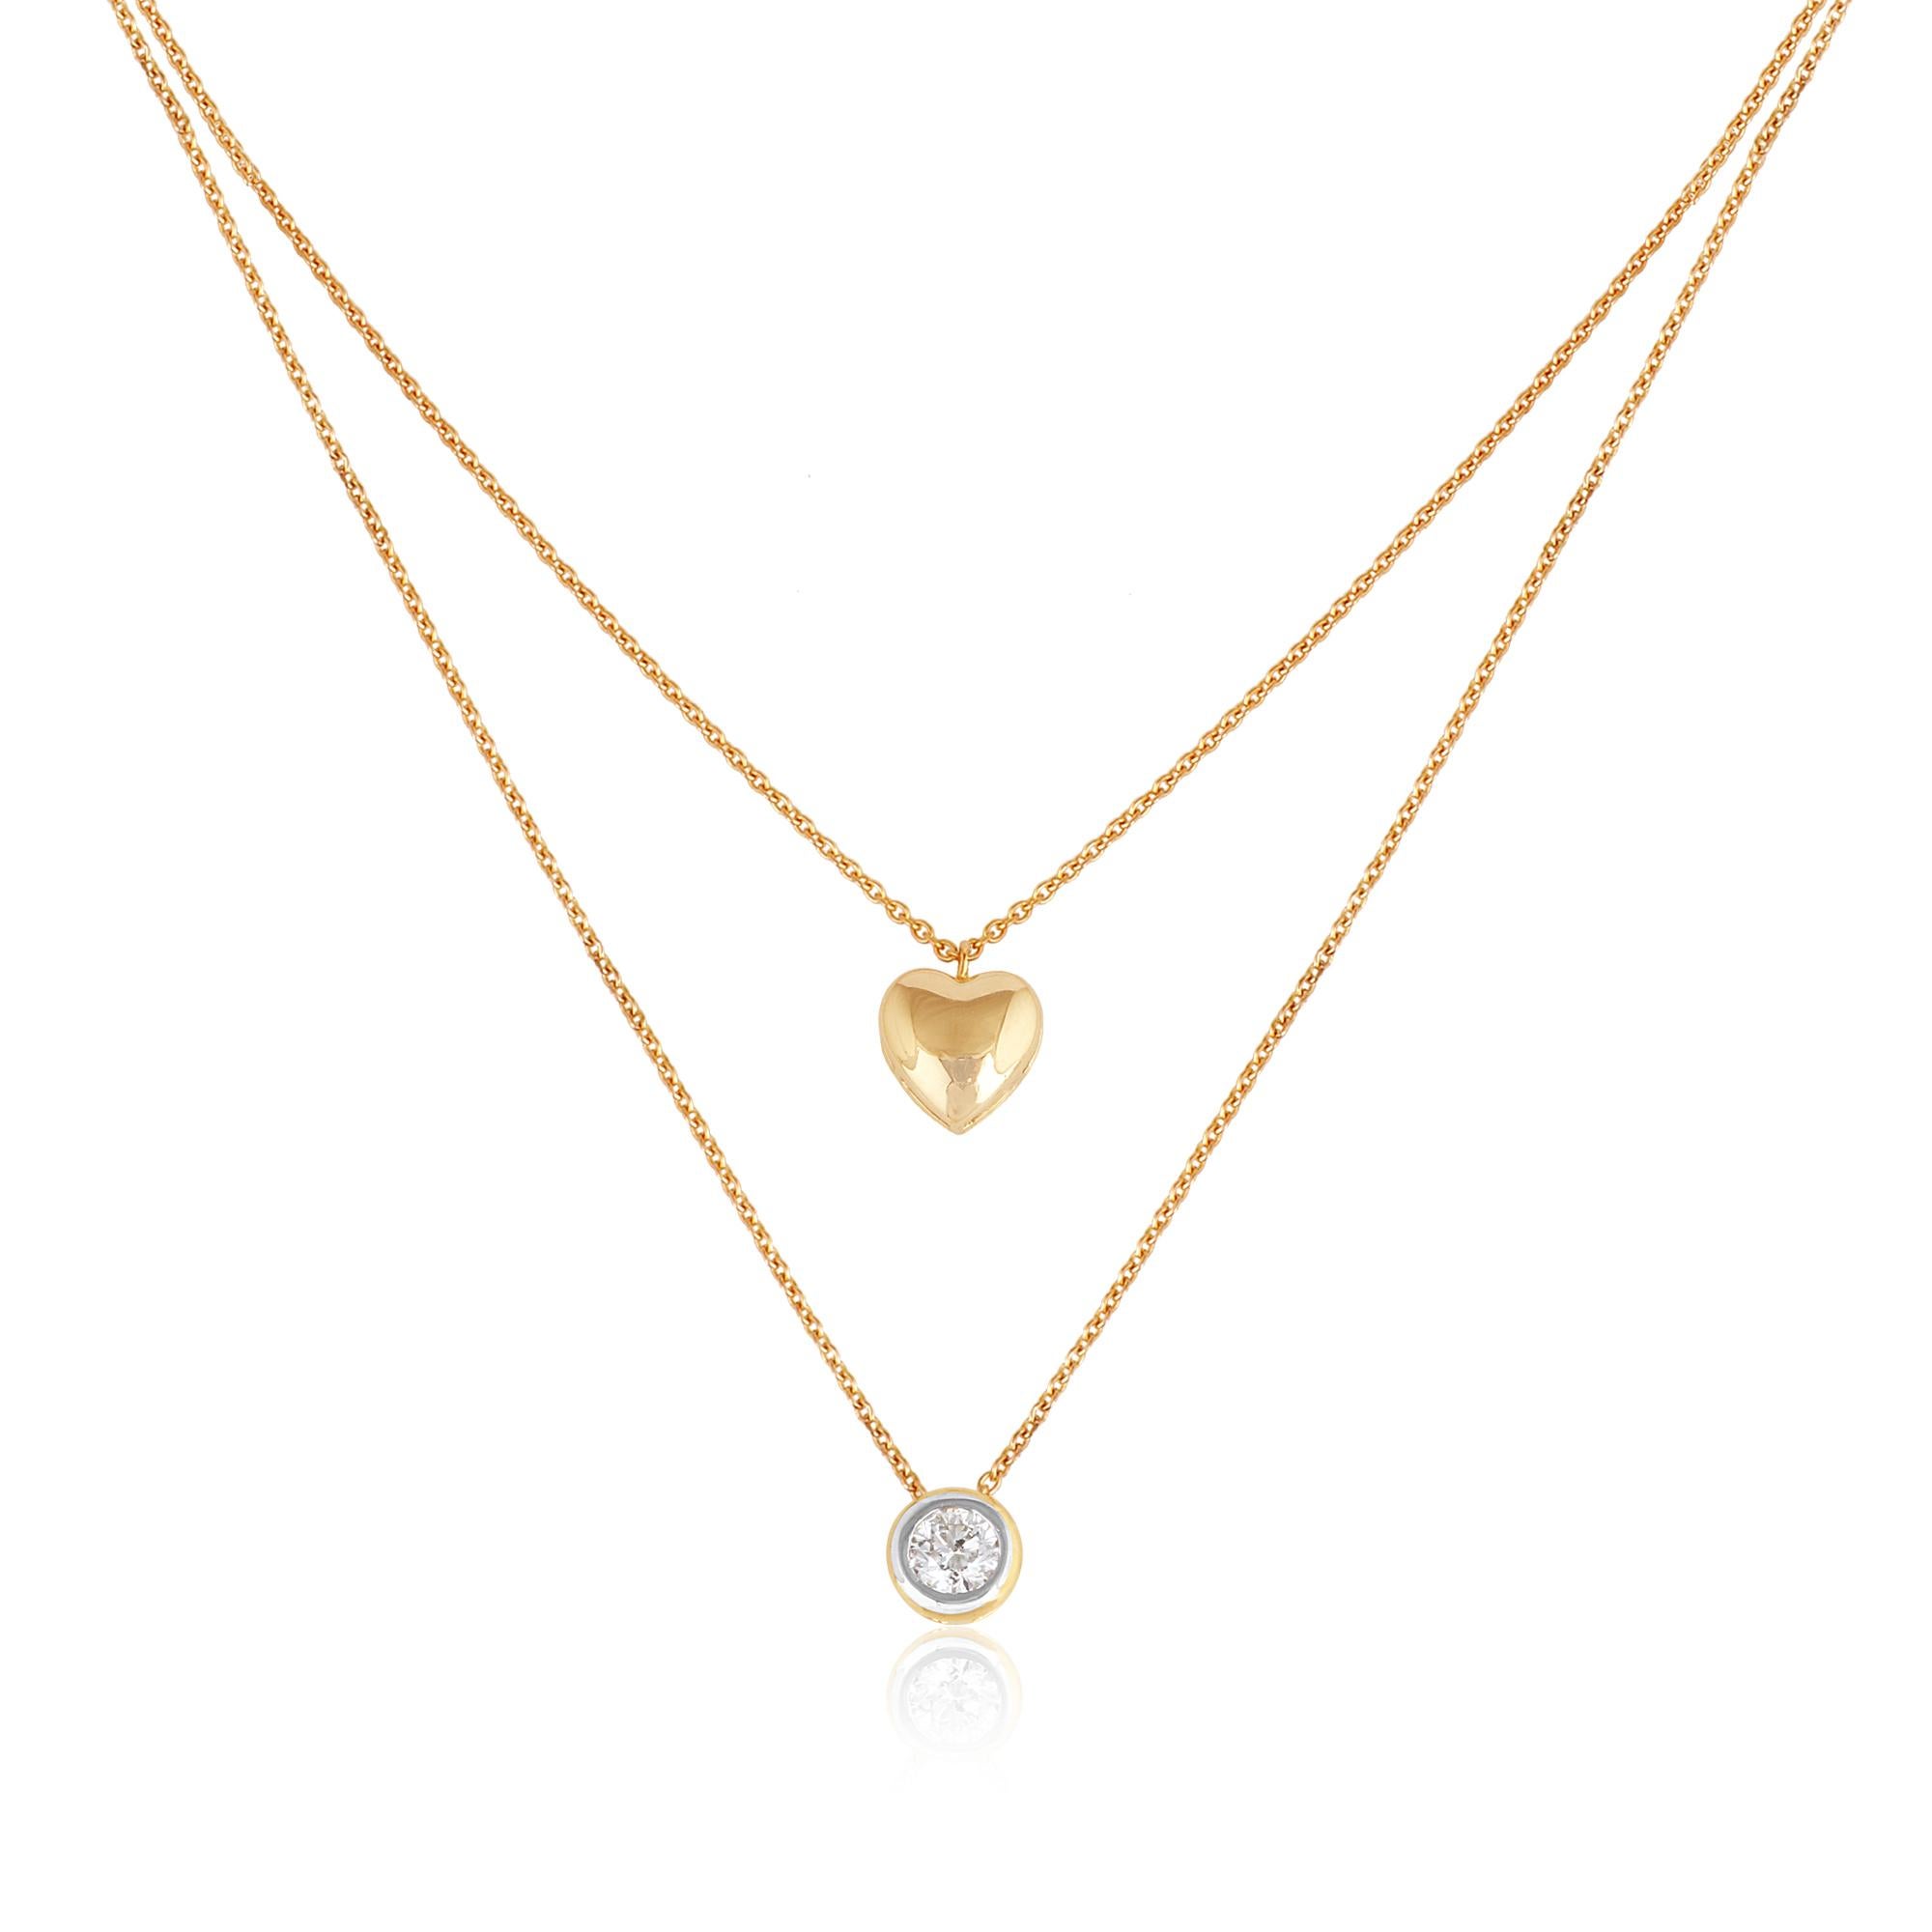 Presenting a stunning piece of fine jewelry, the Natural Bezel Set Diamond Heart Charm Necklace in 14 Karat Yellow Gold is a true embodiment of elegance and romance.
Item Code :- CN-26065
Gross Wt. :- 5.60 gm
14k Solid Yellow Gold Wt. :- 5.50